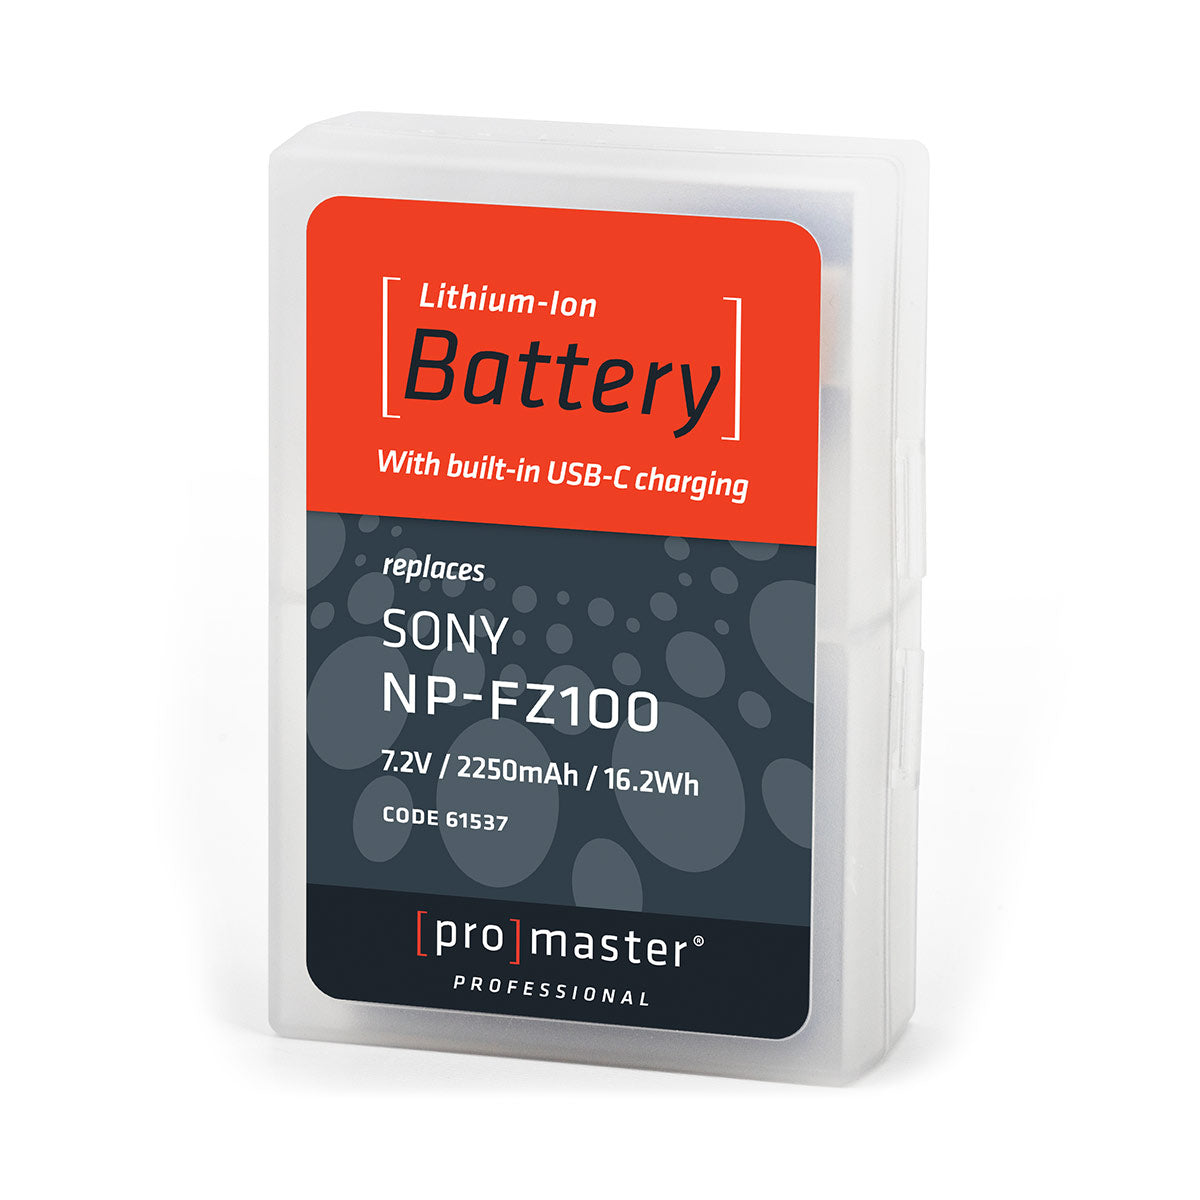 ProMaster NP-FZ100 Li-ion Battery with USB-C Charging for Sony